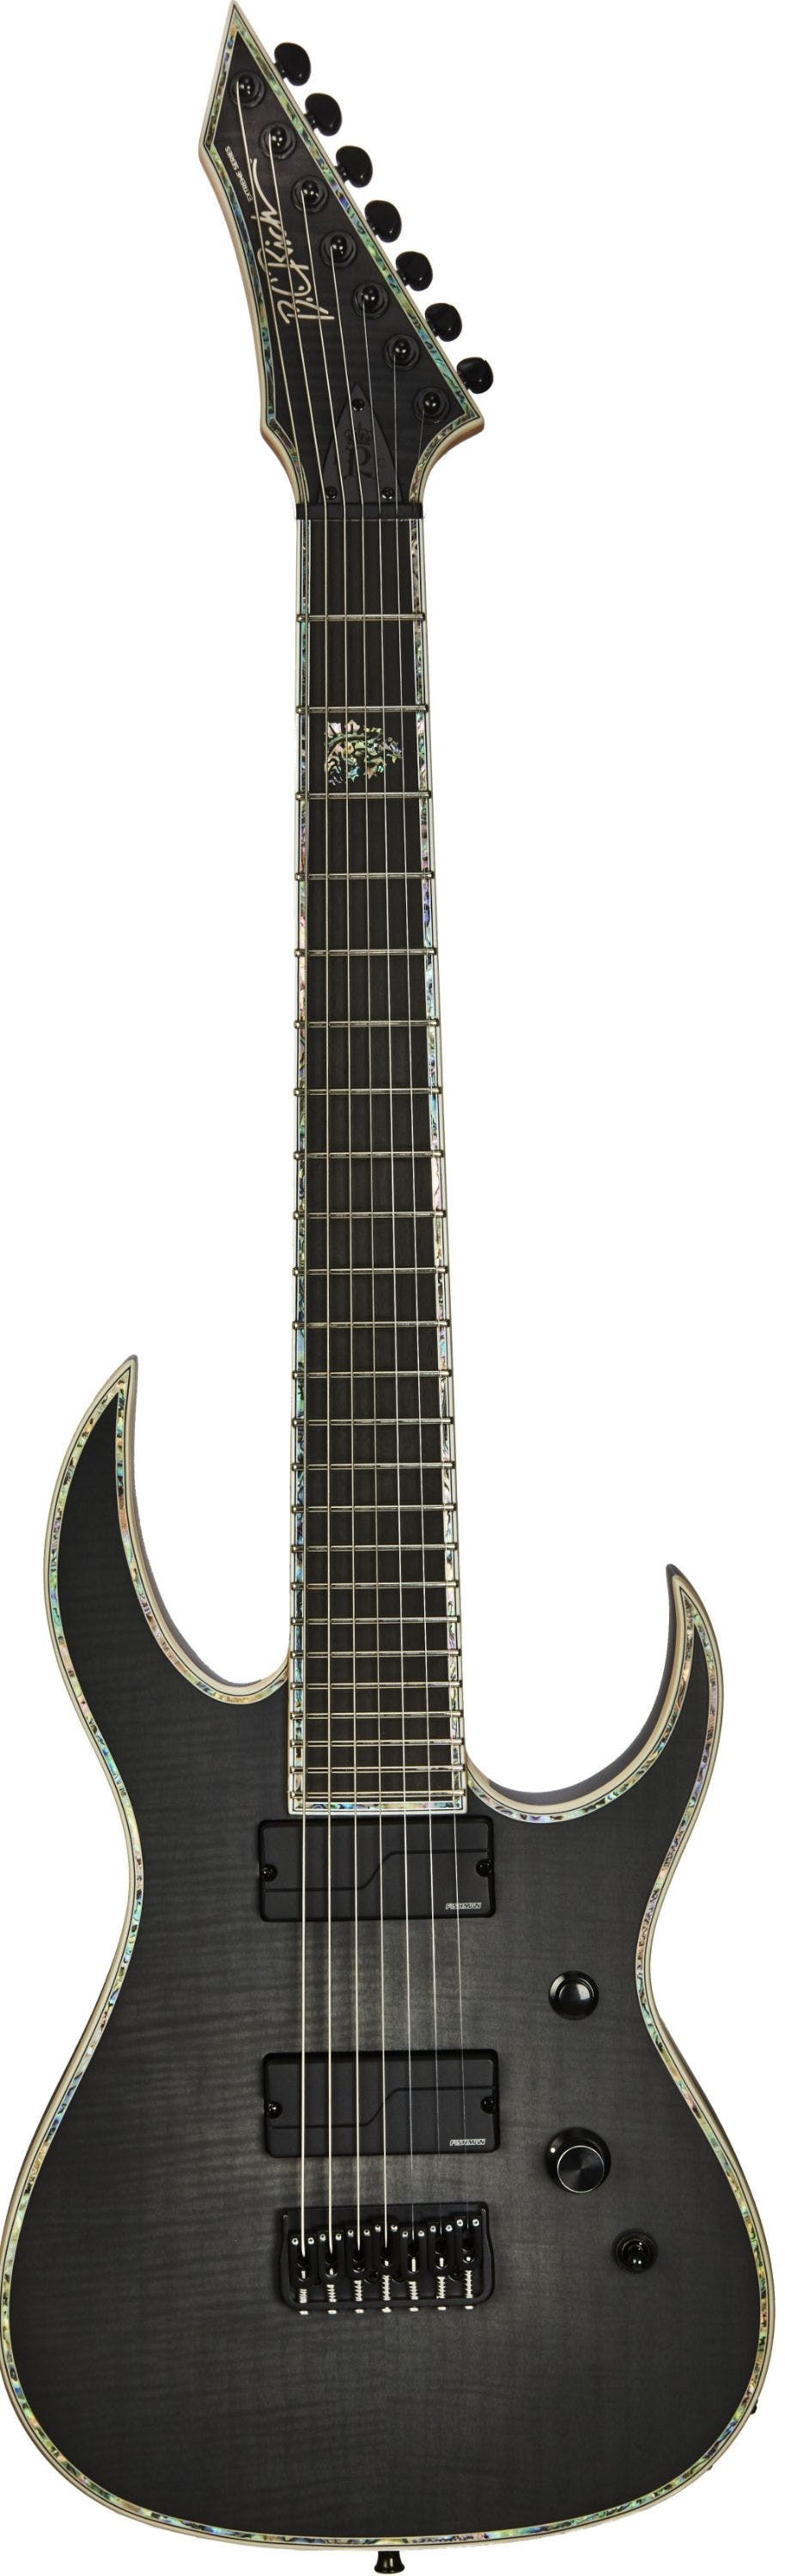 BC Rich Extreme Series Shredzilla 7 Exotic Electric Guitar in 